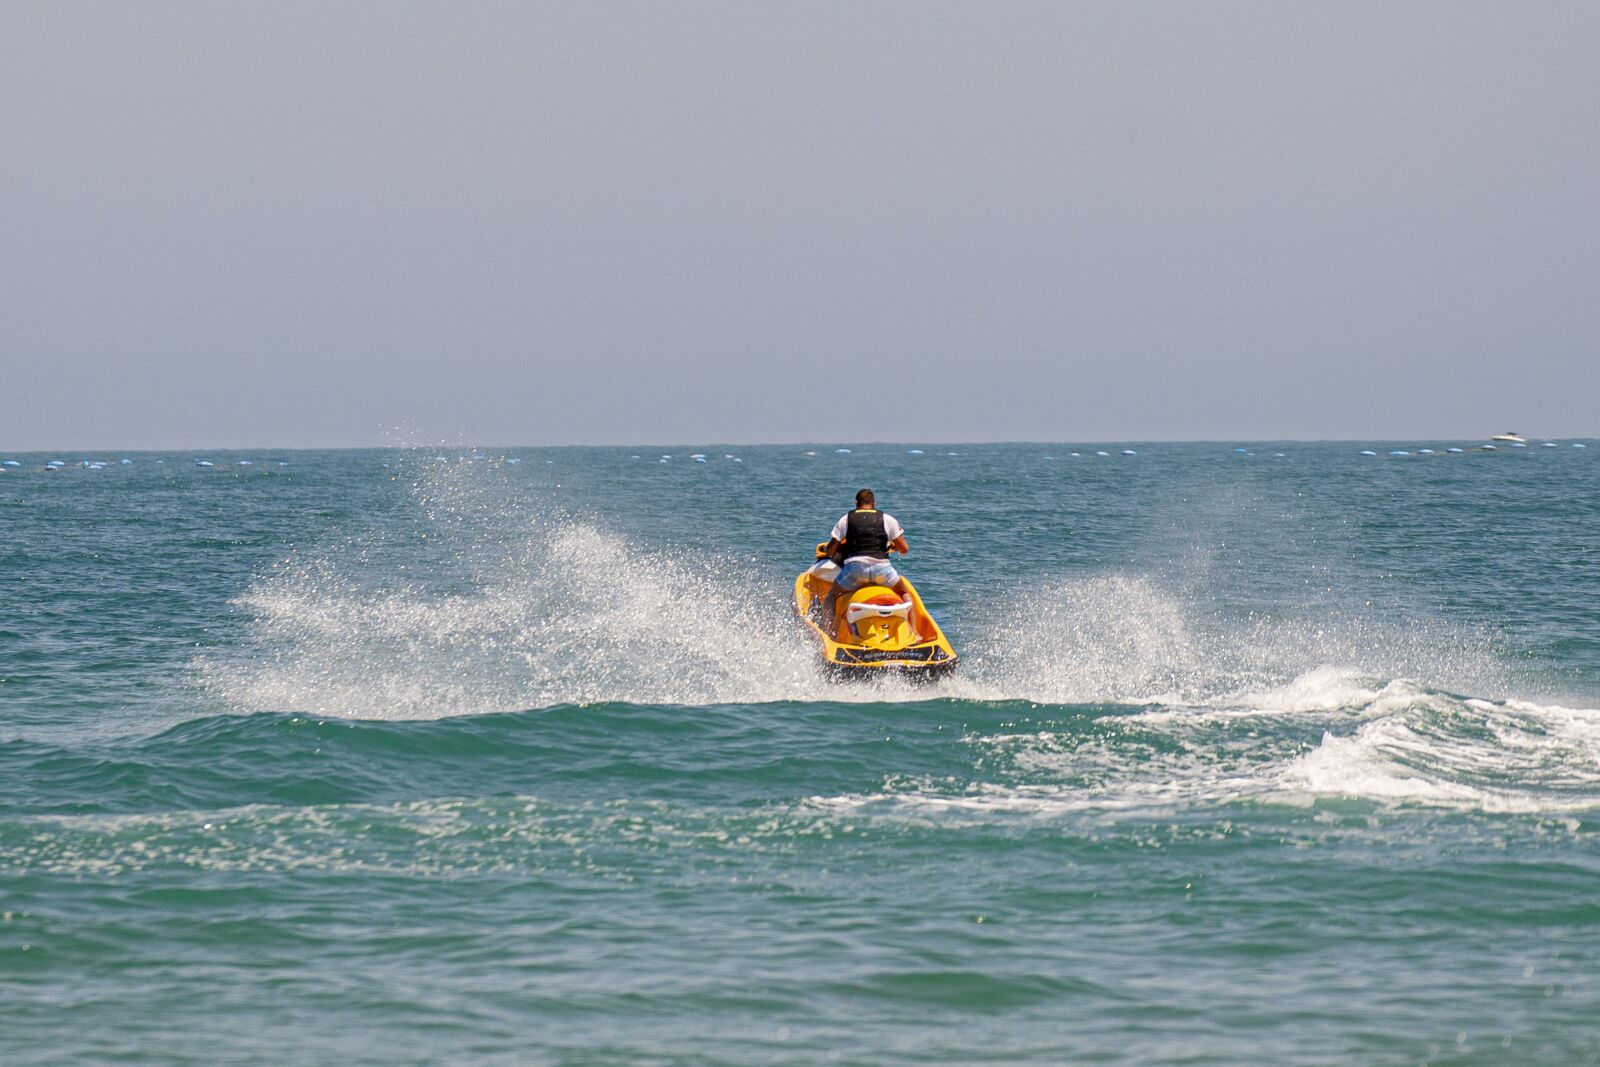 Sony FE 70-200mm F4 G OSS sample photo. Water sports, jet, sport photography